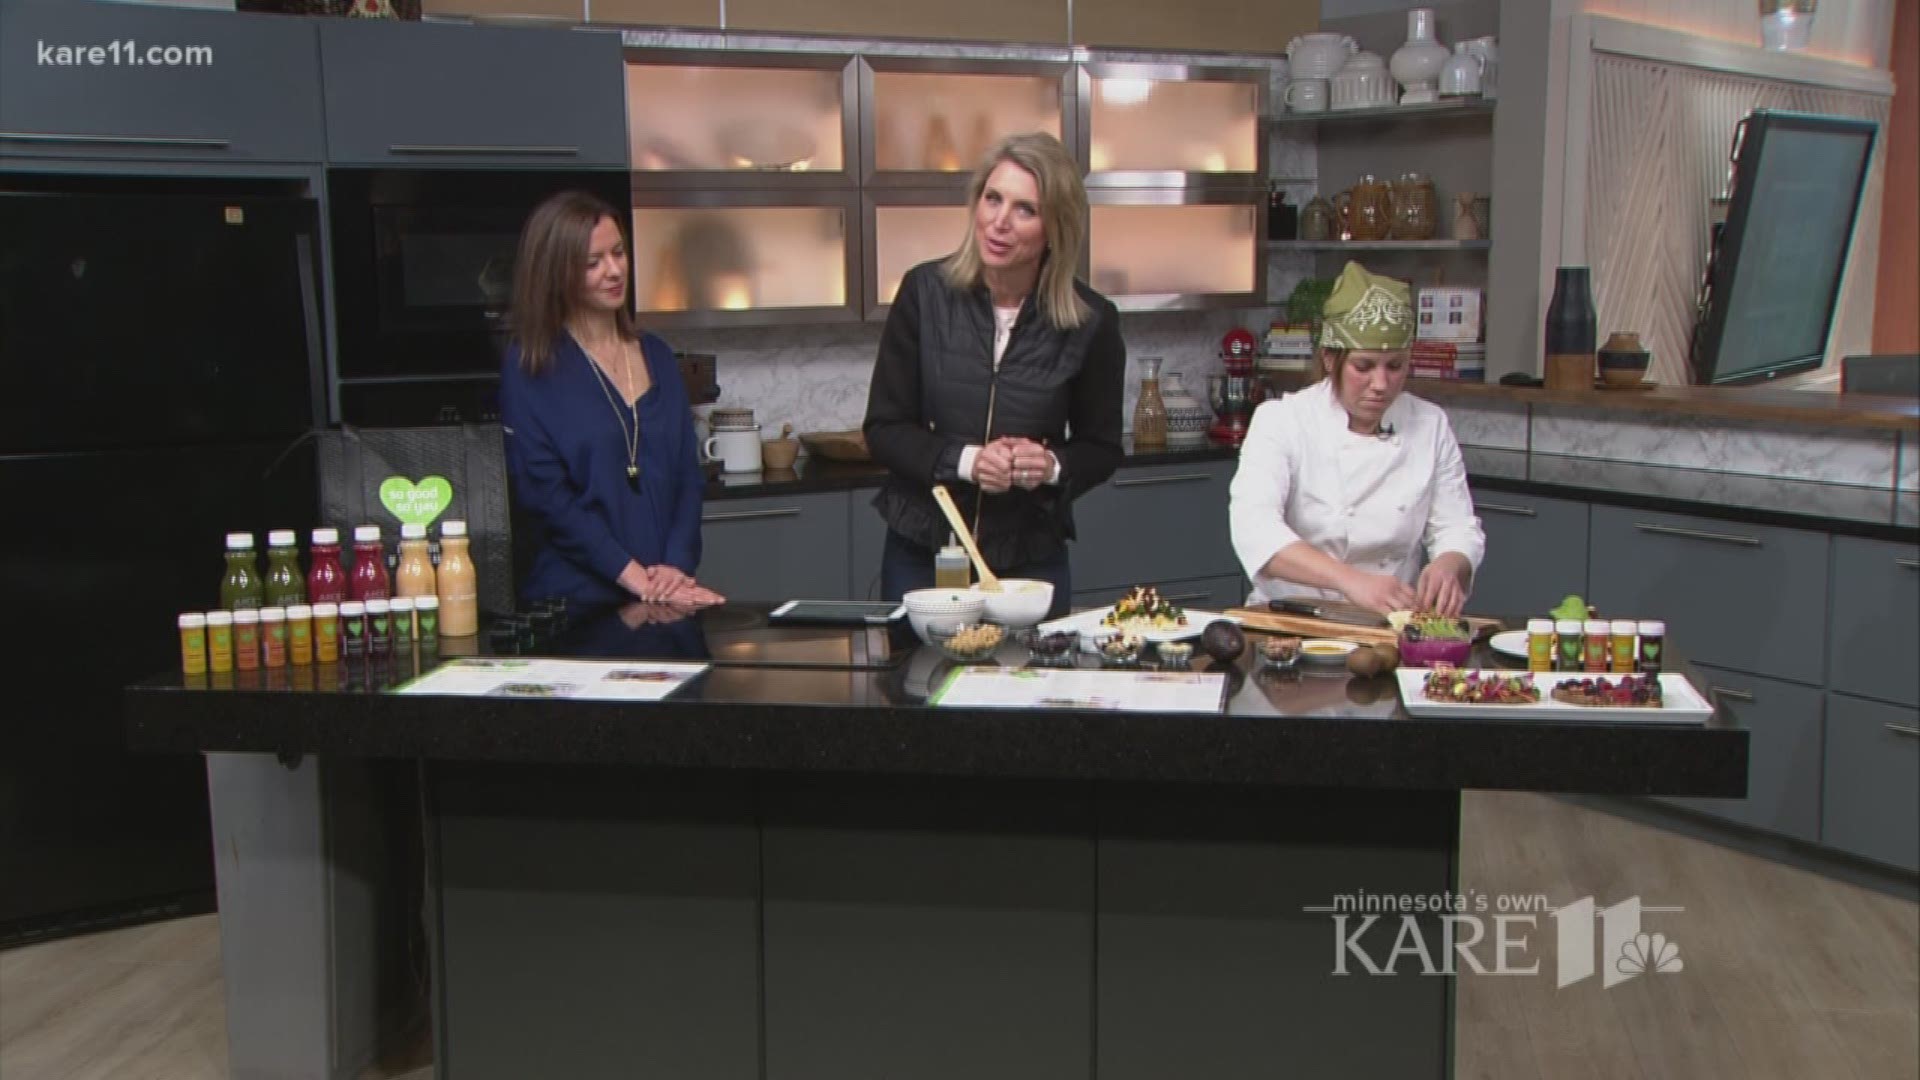 Rita Katona, founder of So Good So You Caf� and head chef Jessi Peine talk about some of their products and share a healthy recipe.